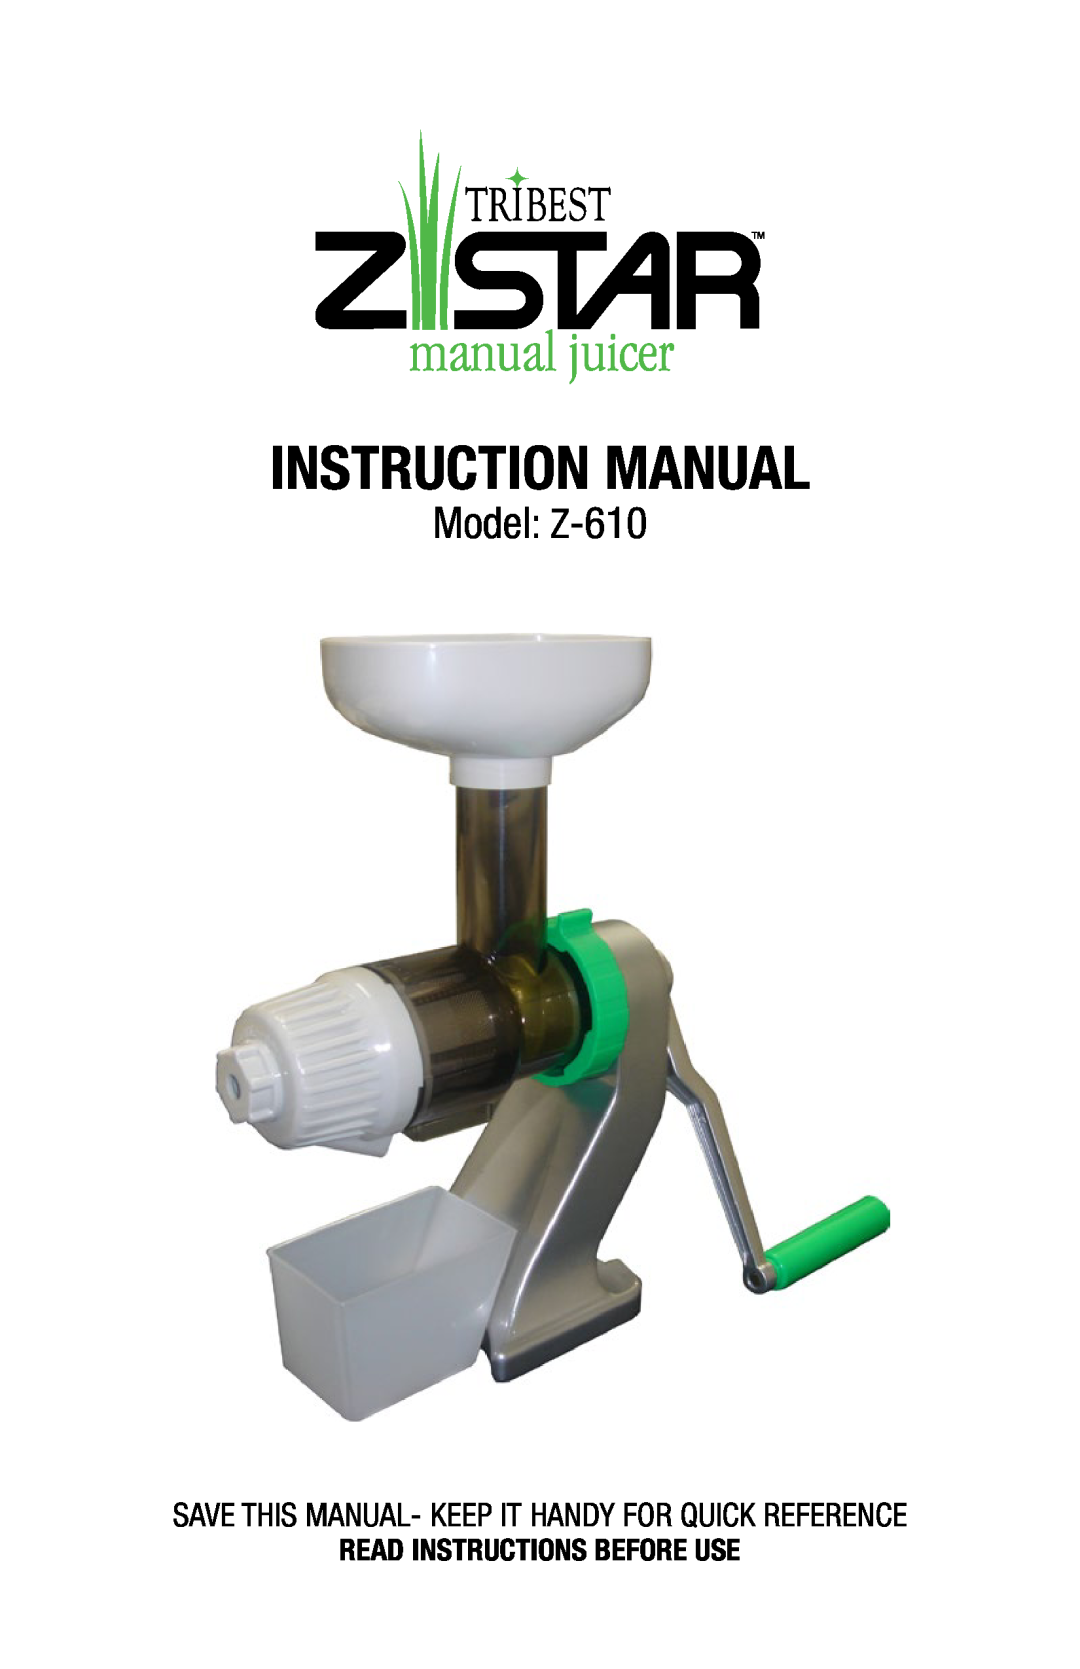 Tribest instruction manual Read Instructions Before Use, Model Z-610 